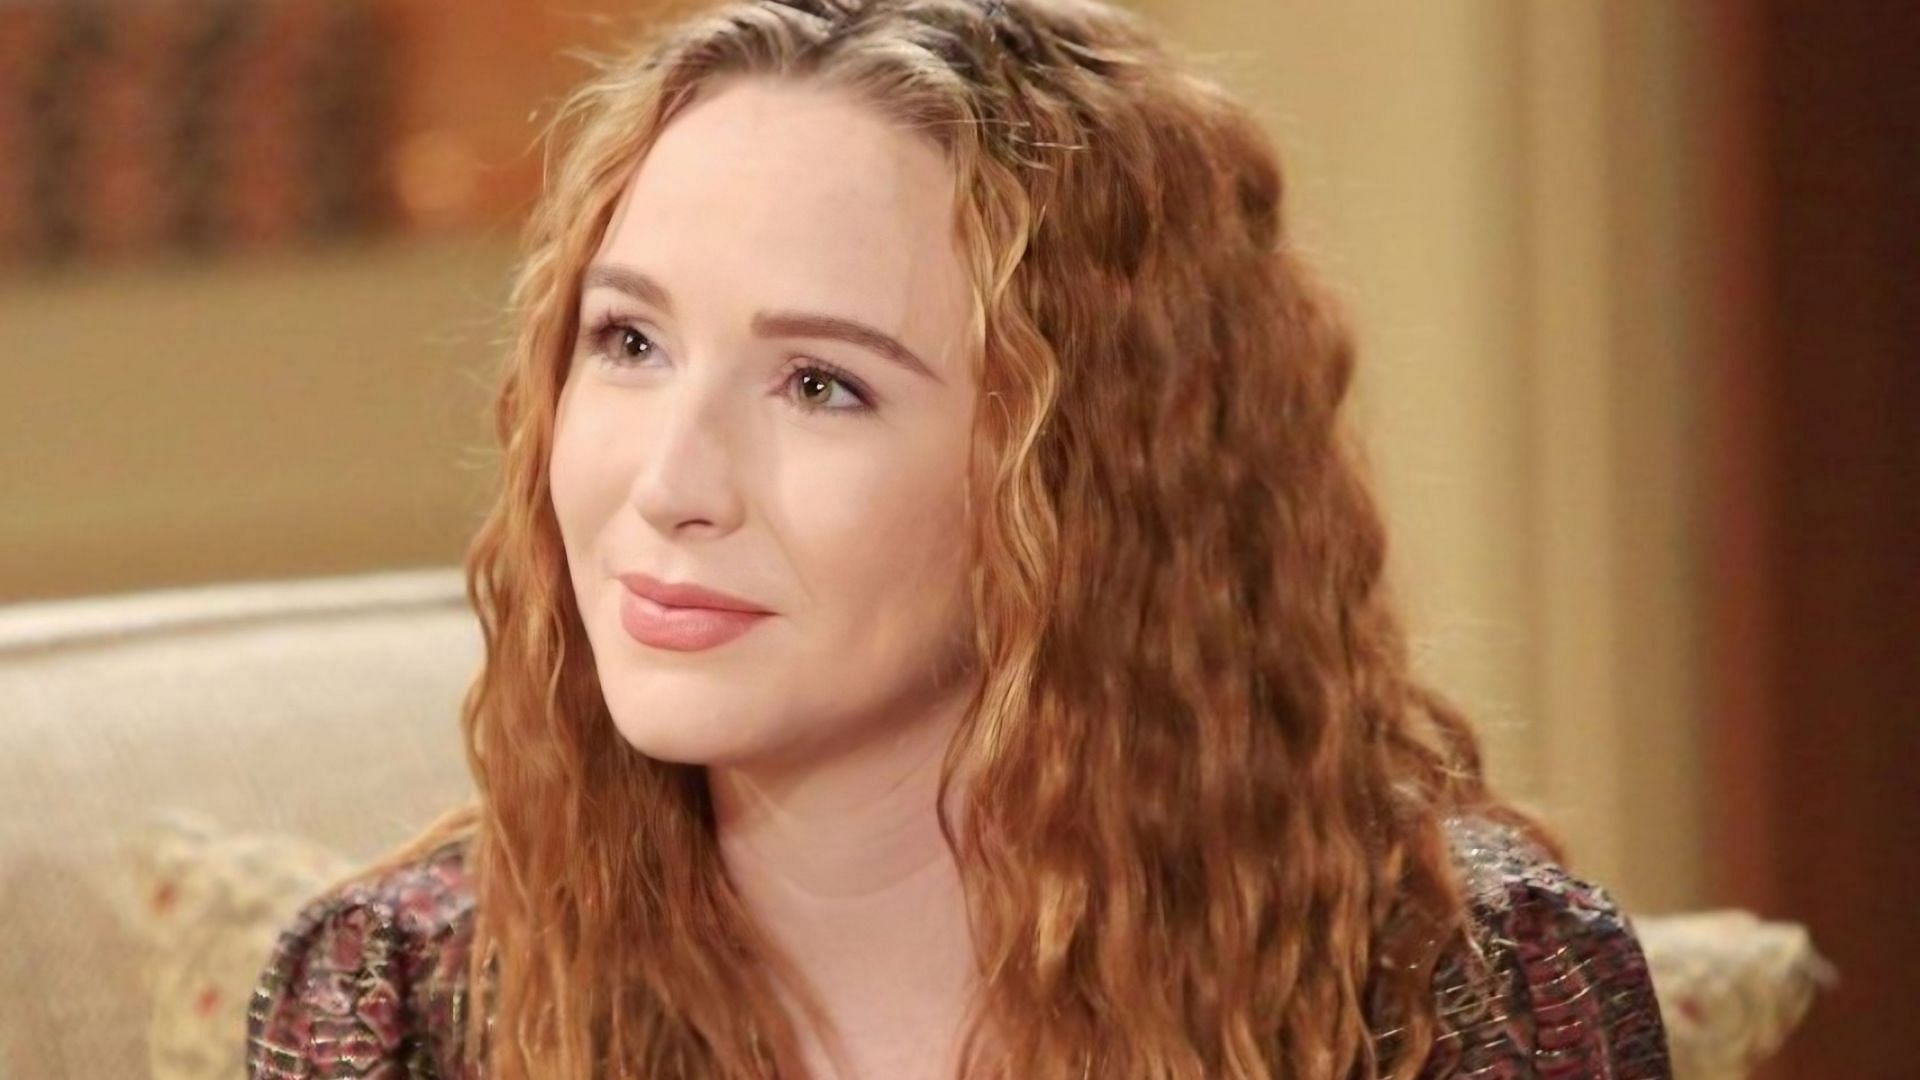 Camryn Grimes as Mariah on The Young and the Restless